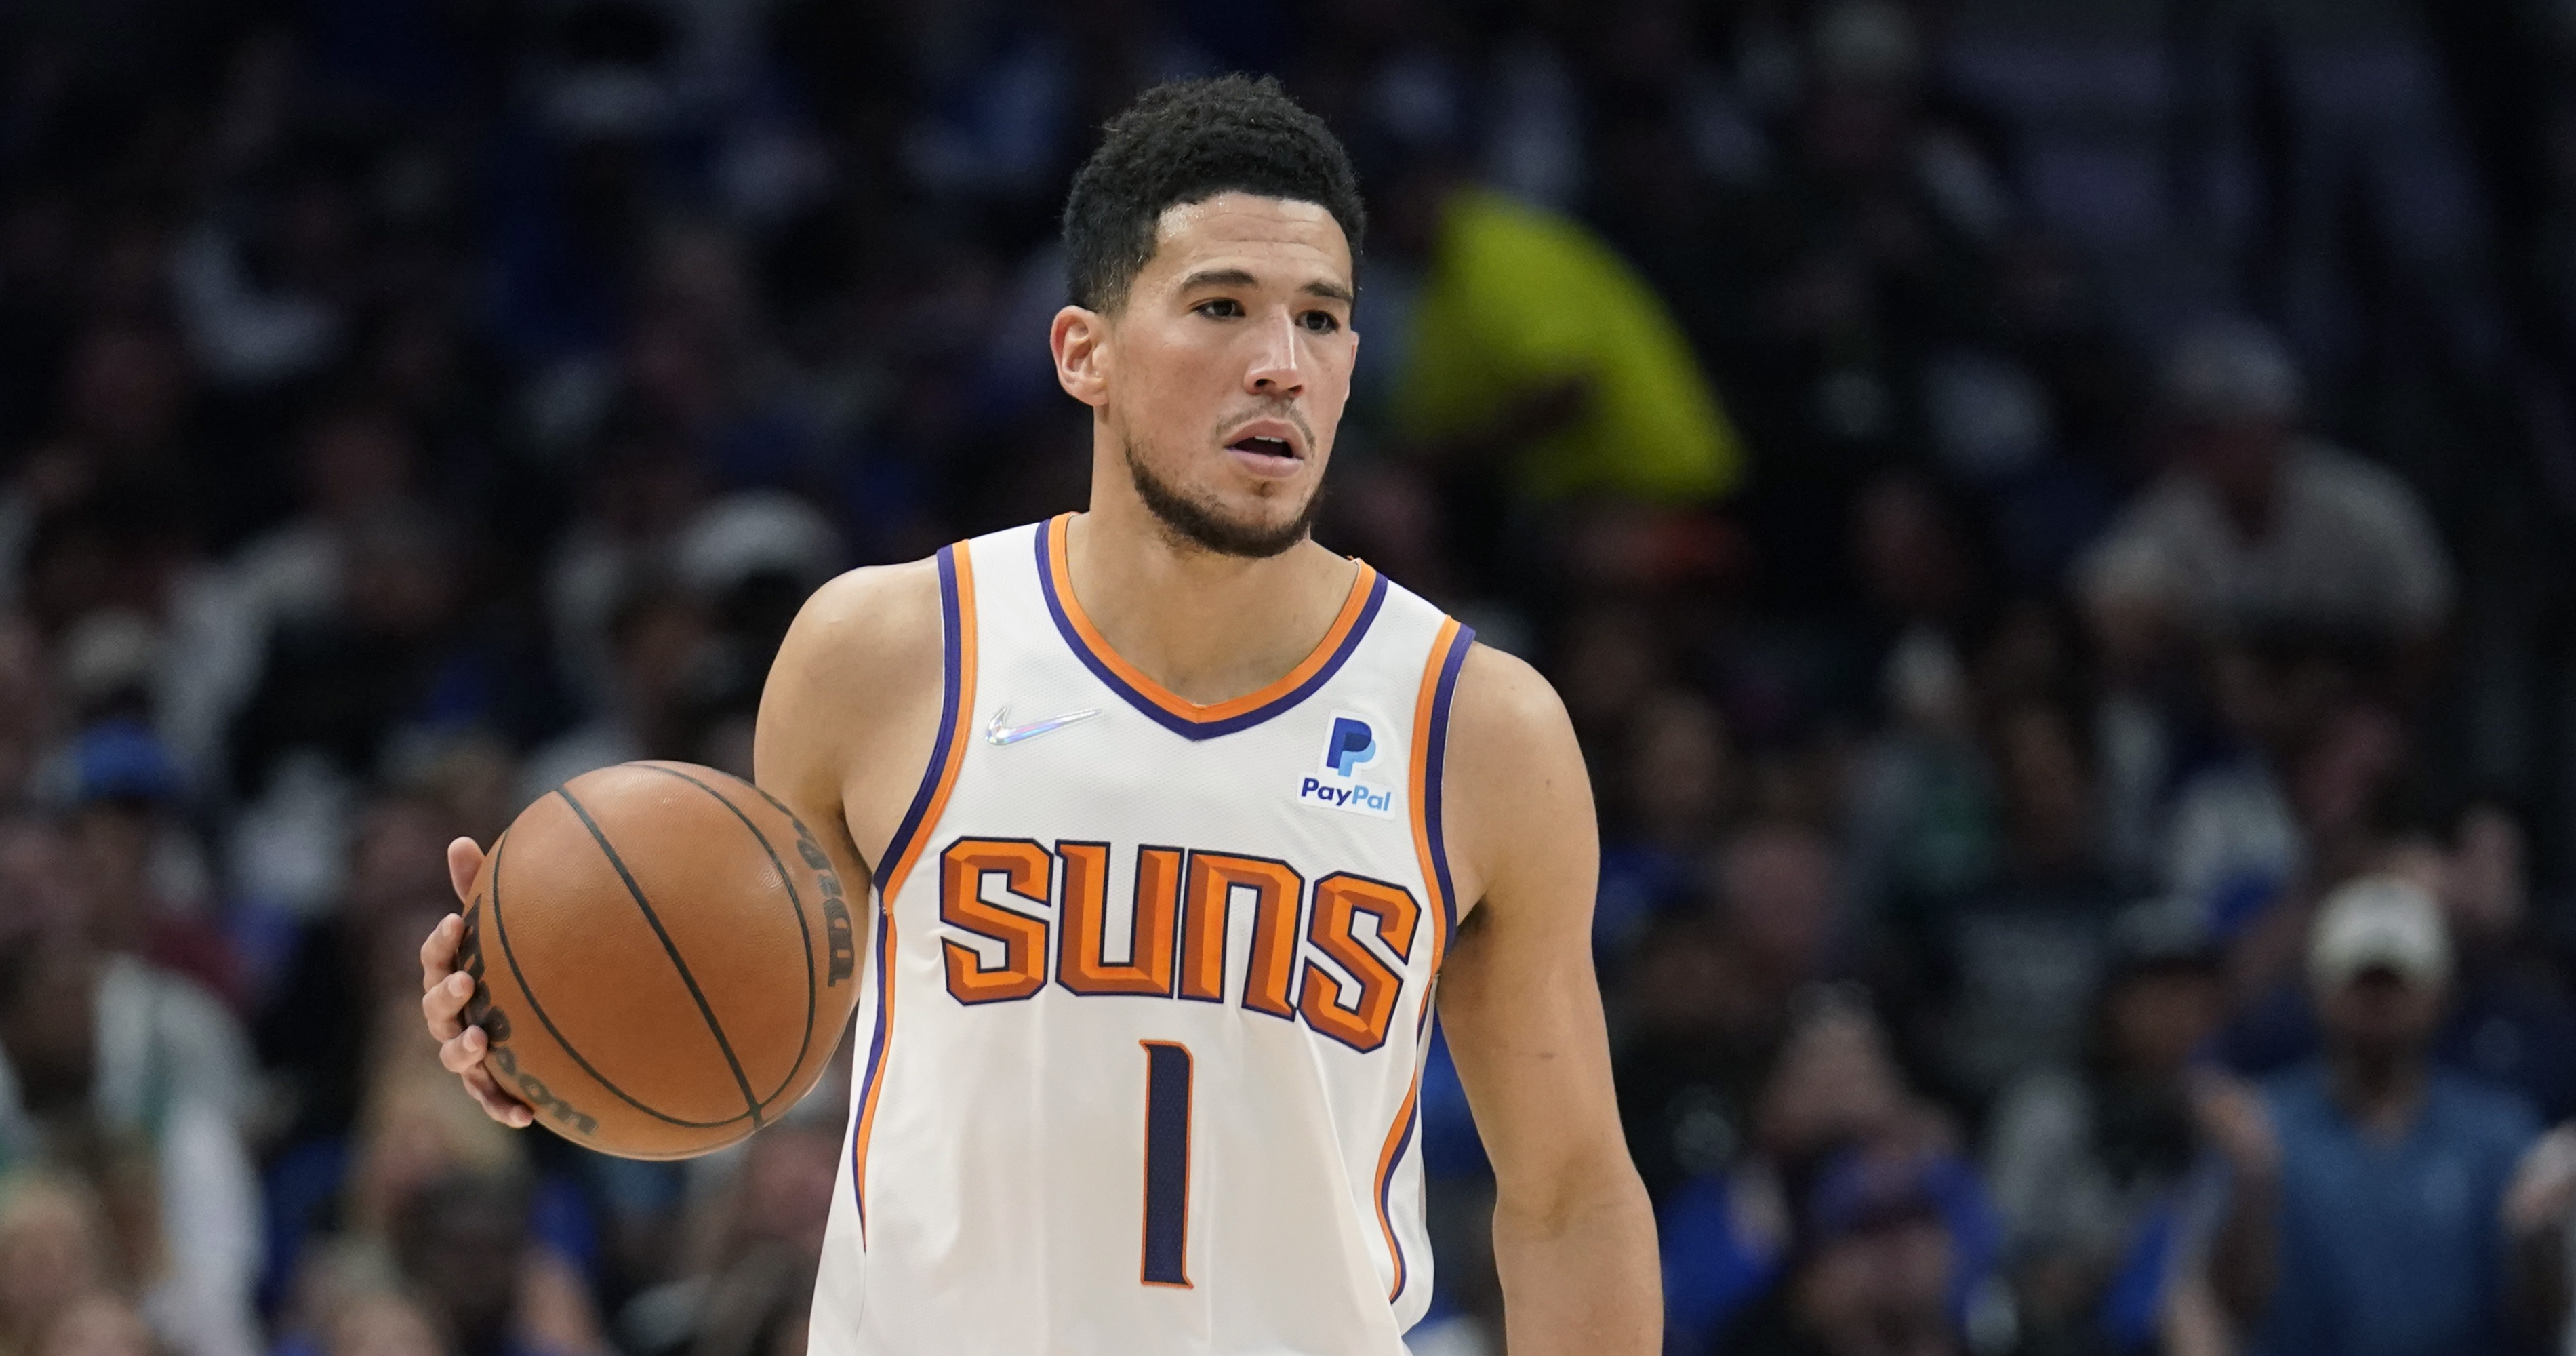 Devin Booker and Karl-Anthony Towns named 2022 NBA All-Stars